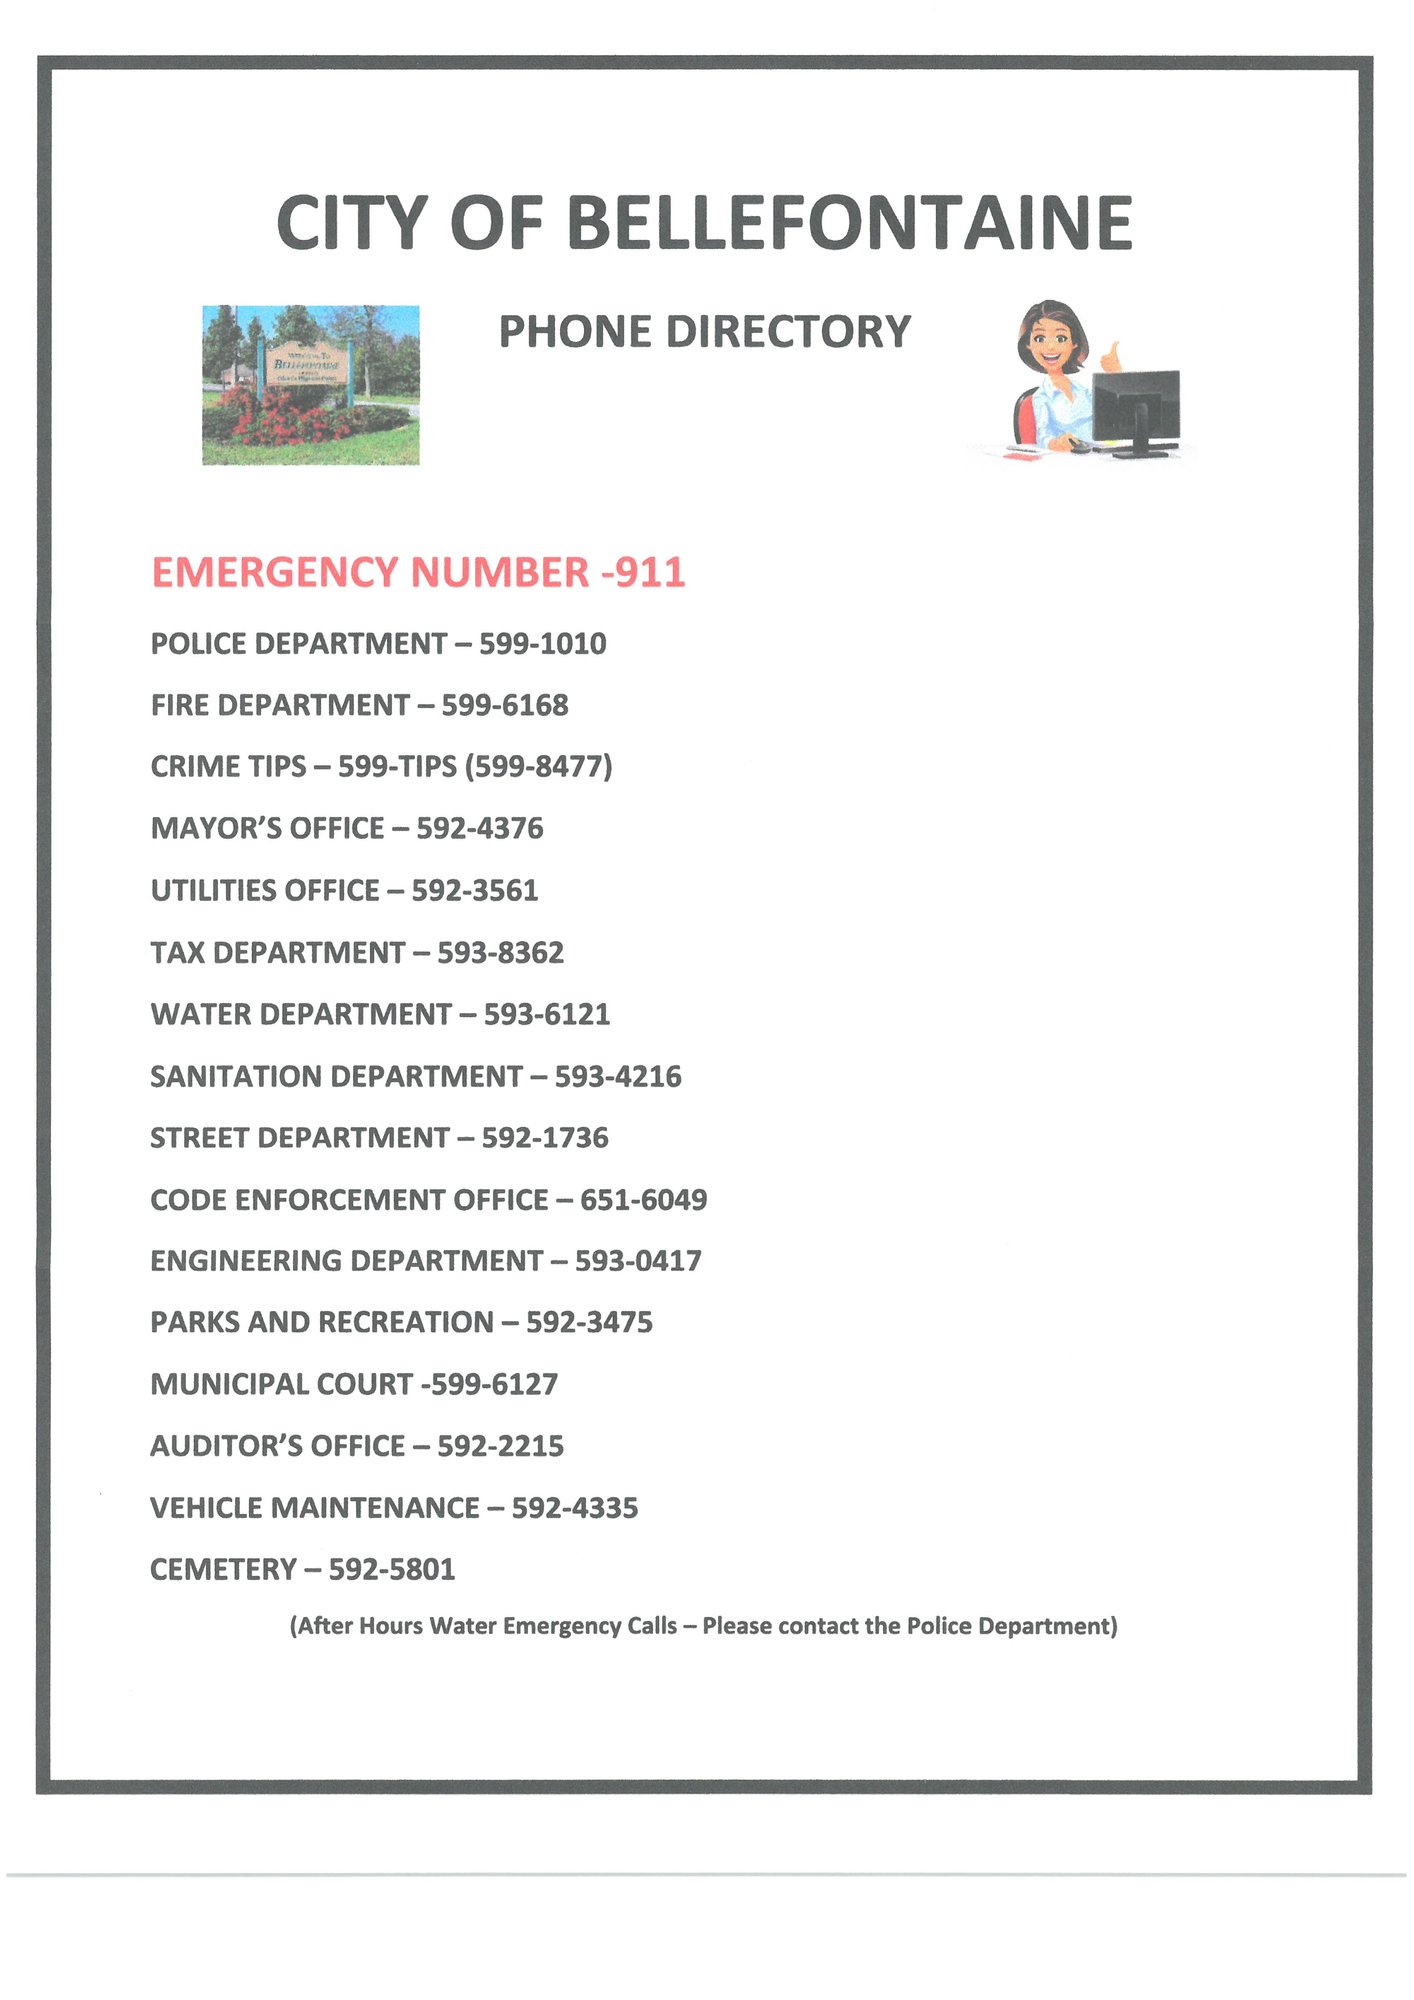 Bellefontaine_Phone_Directory